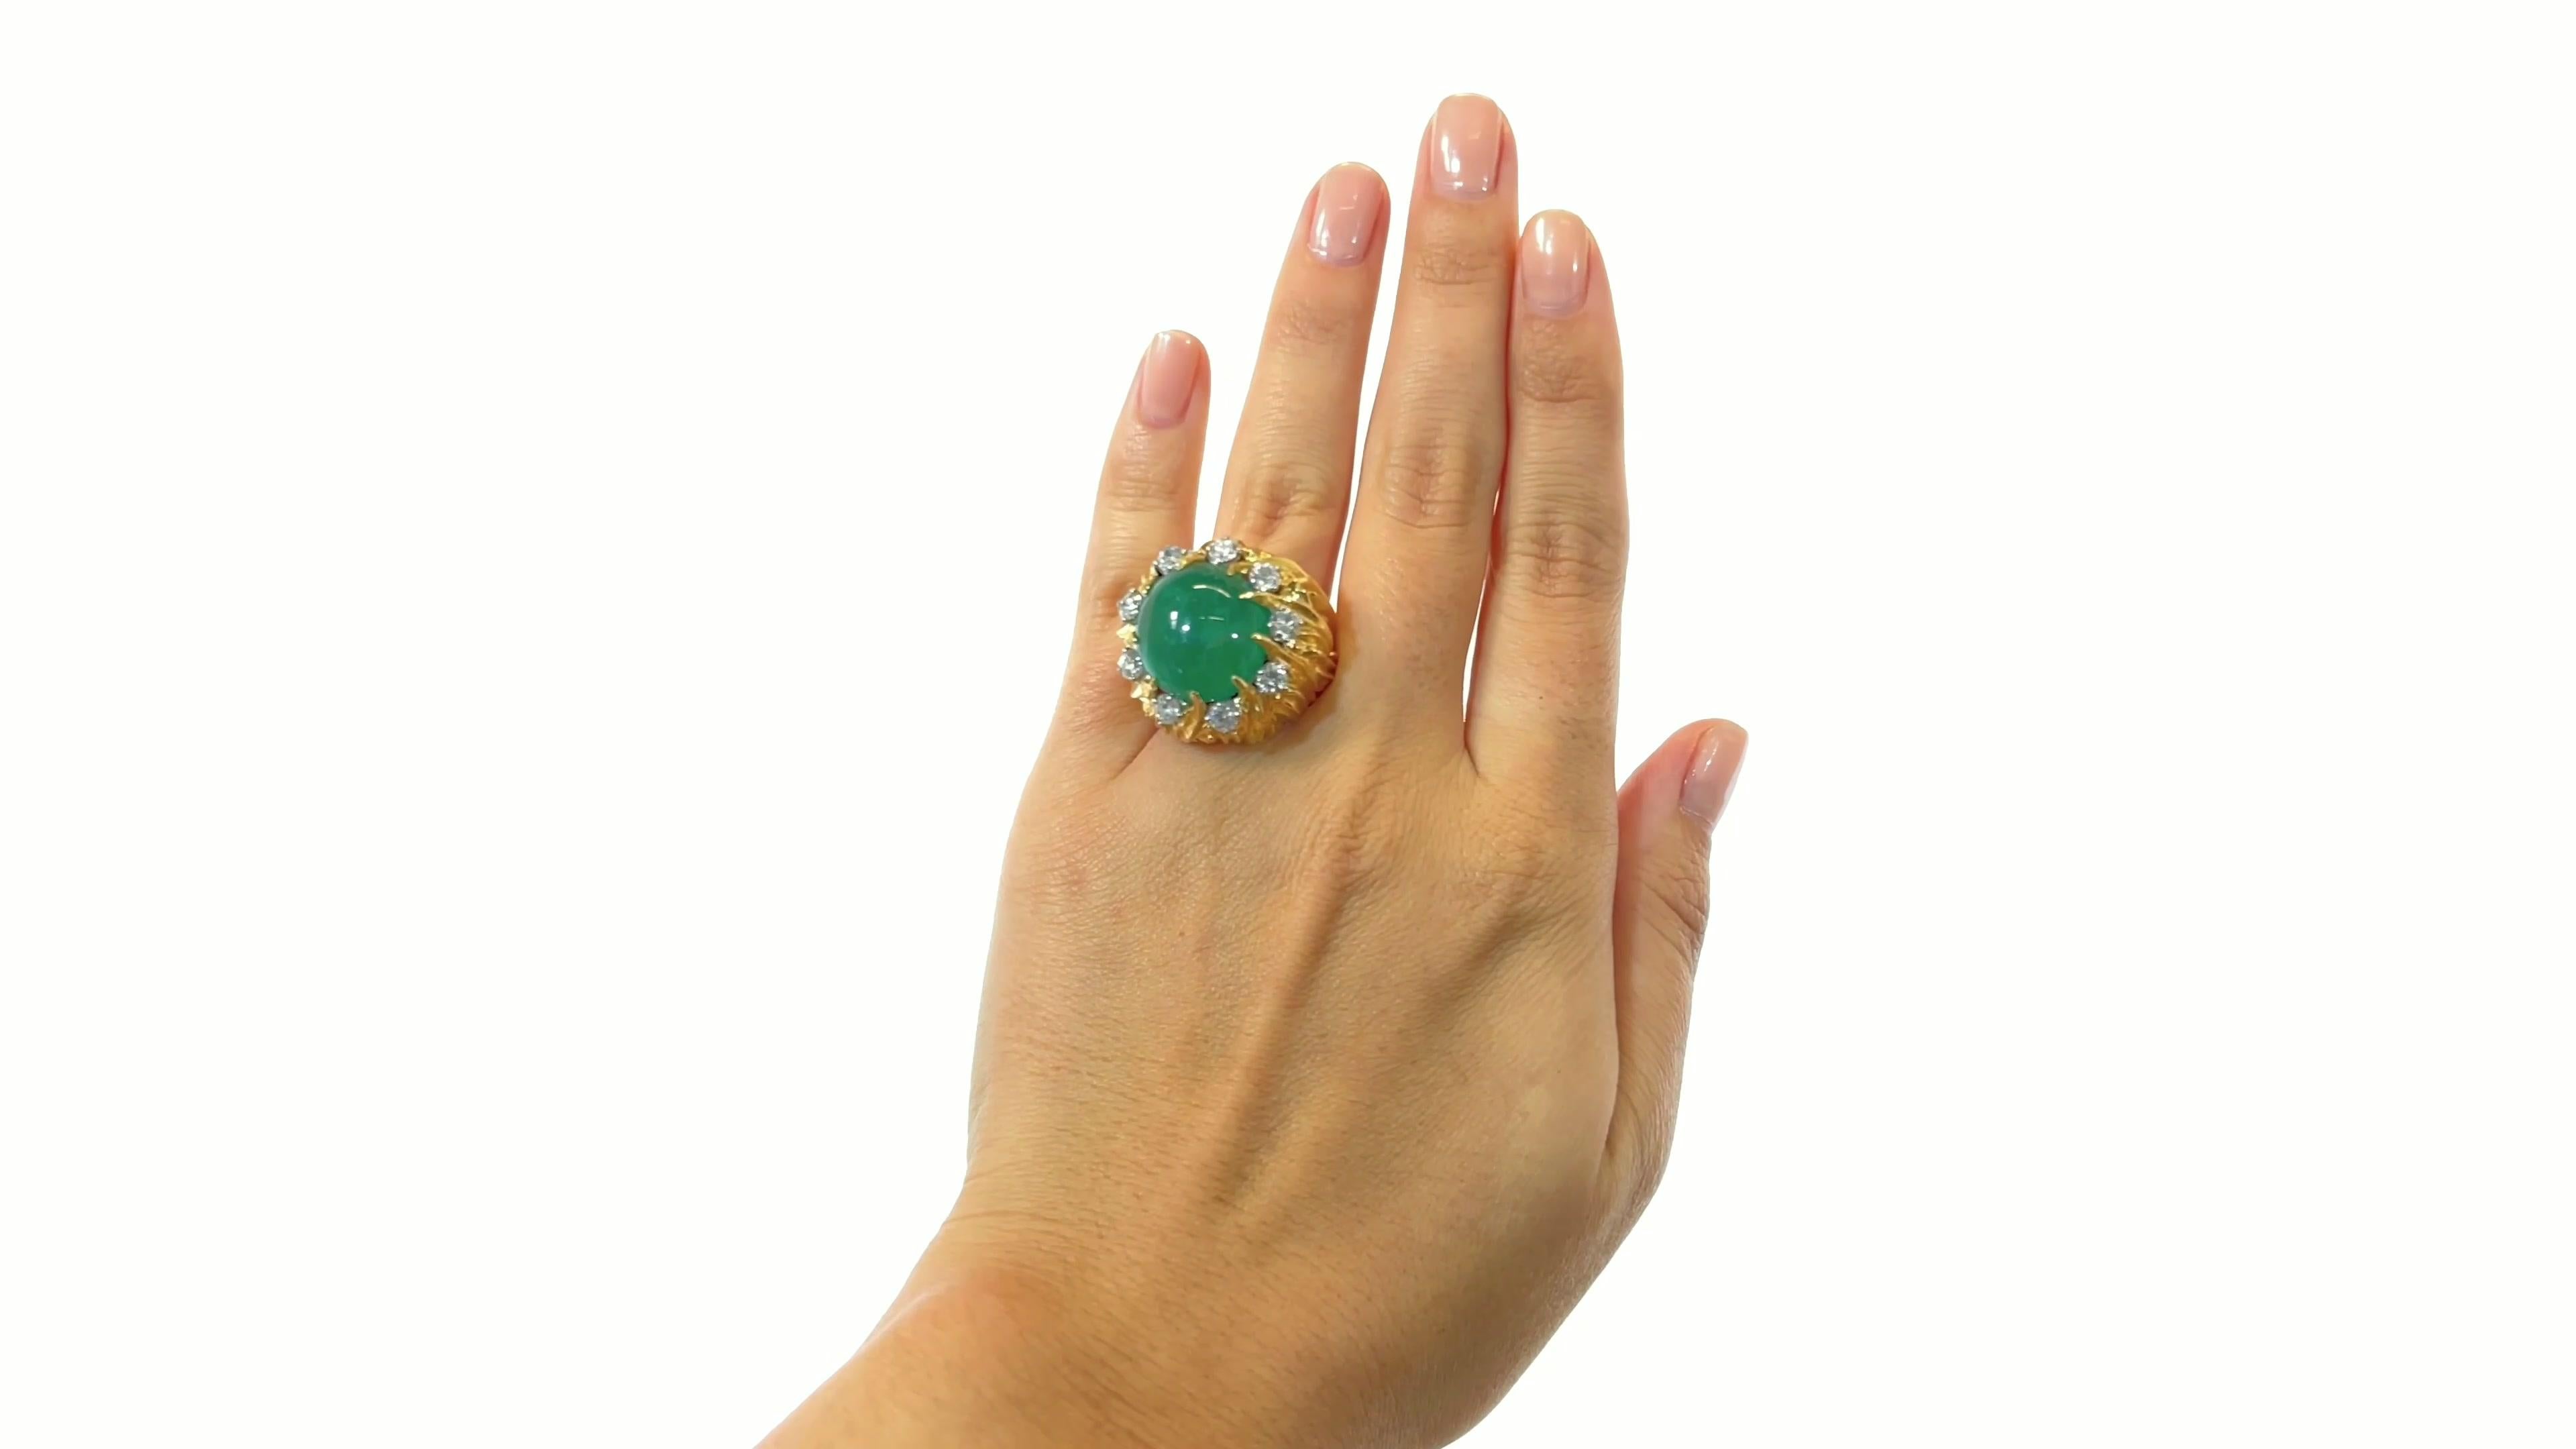 A cocktail ring to remember! This futuristic Retro Emerald Diamond 18k Gold Dome Ring is the epitome of nature. Emerald and diamonds grown in the earth and a stunning 18k gold band carved to mimic the trunk of the tree. The emerald is a cabochon